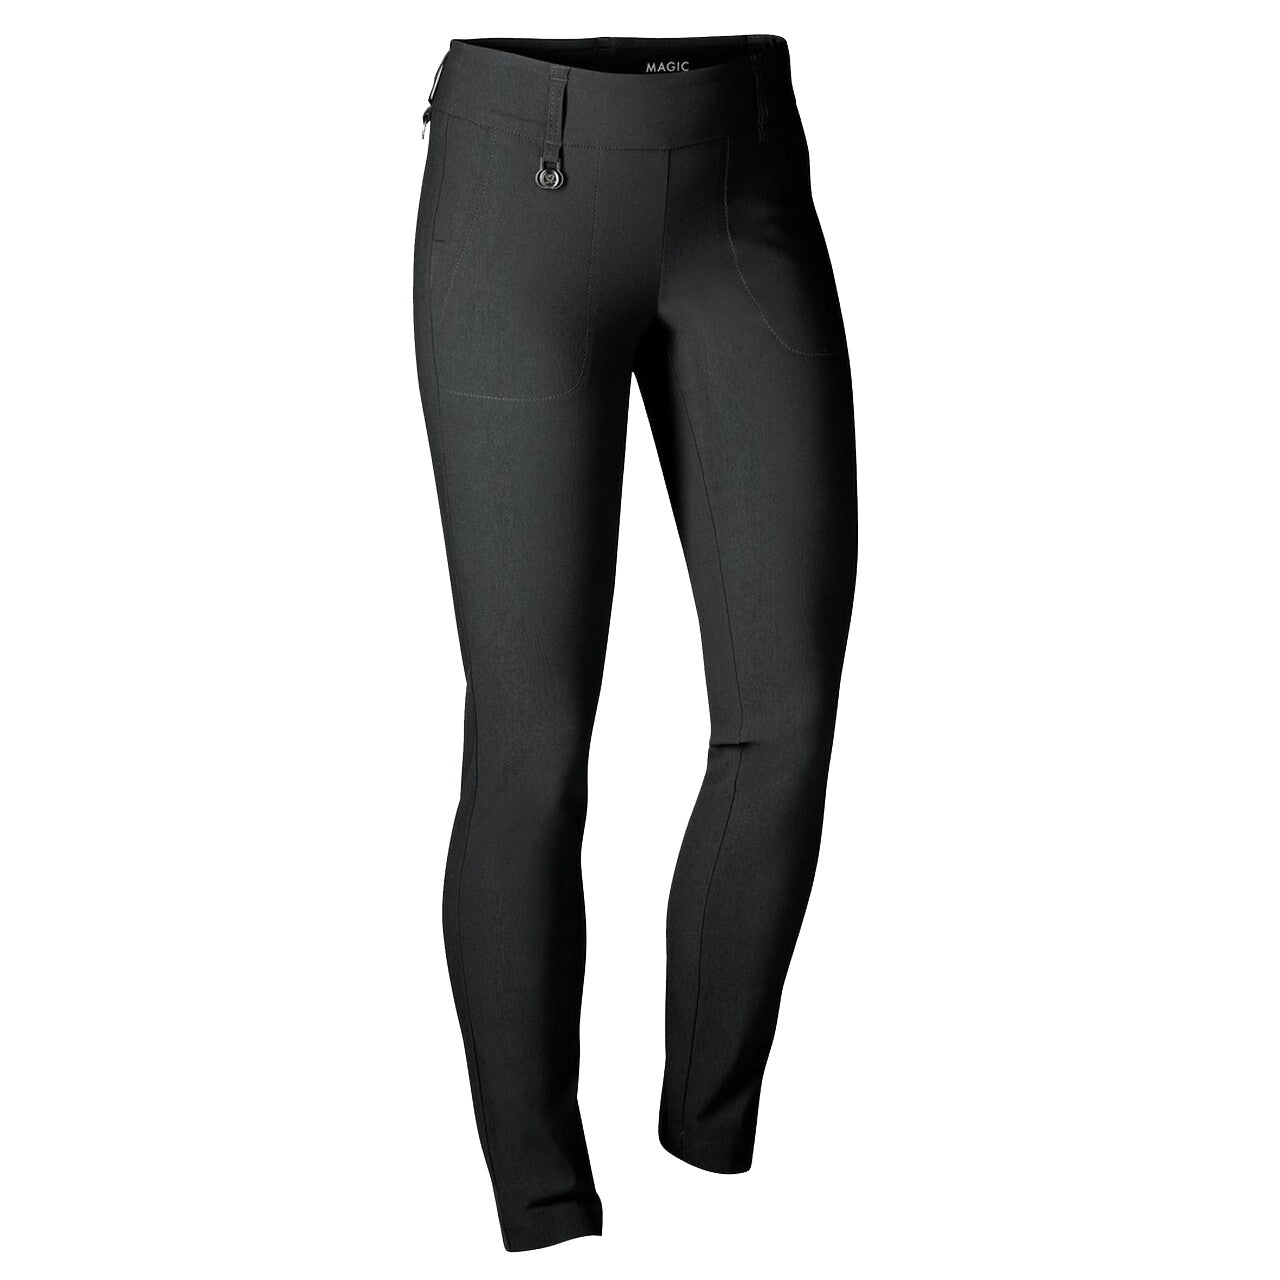 Daily Sports Ladies Magic Golf Trousers 001/272-3/999